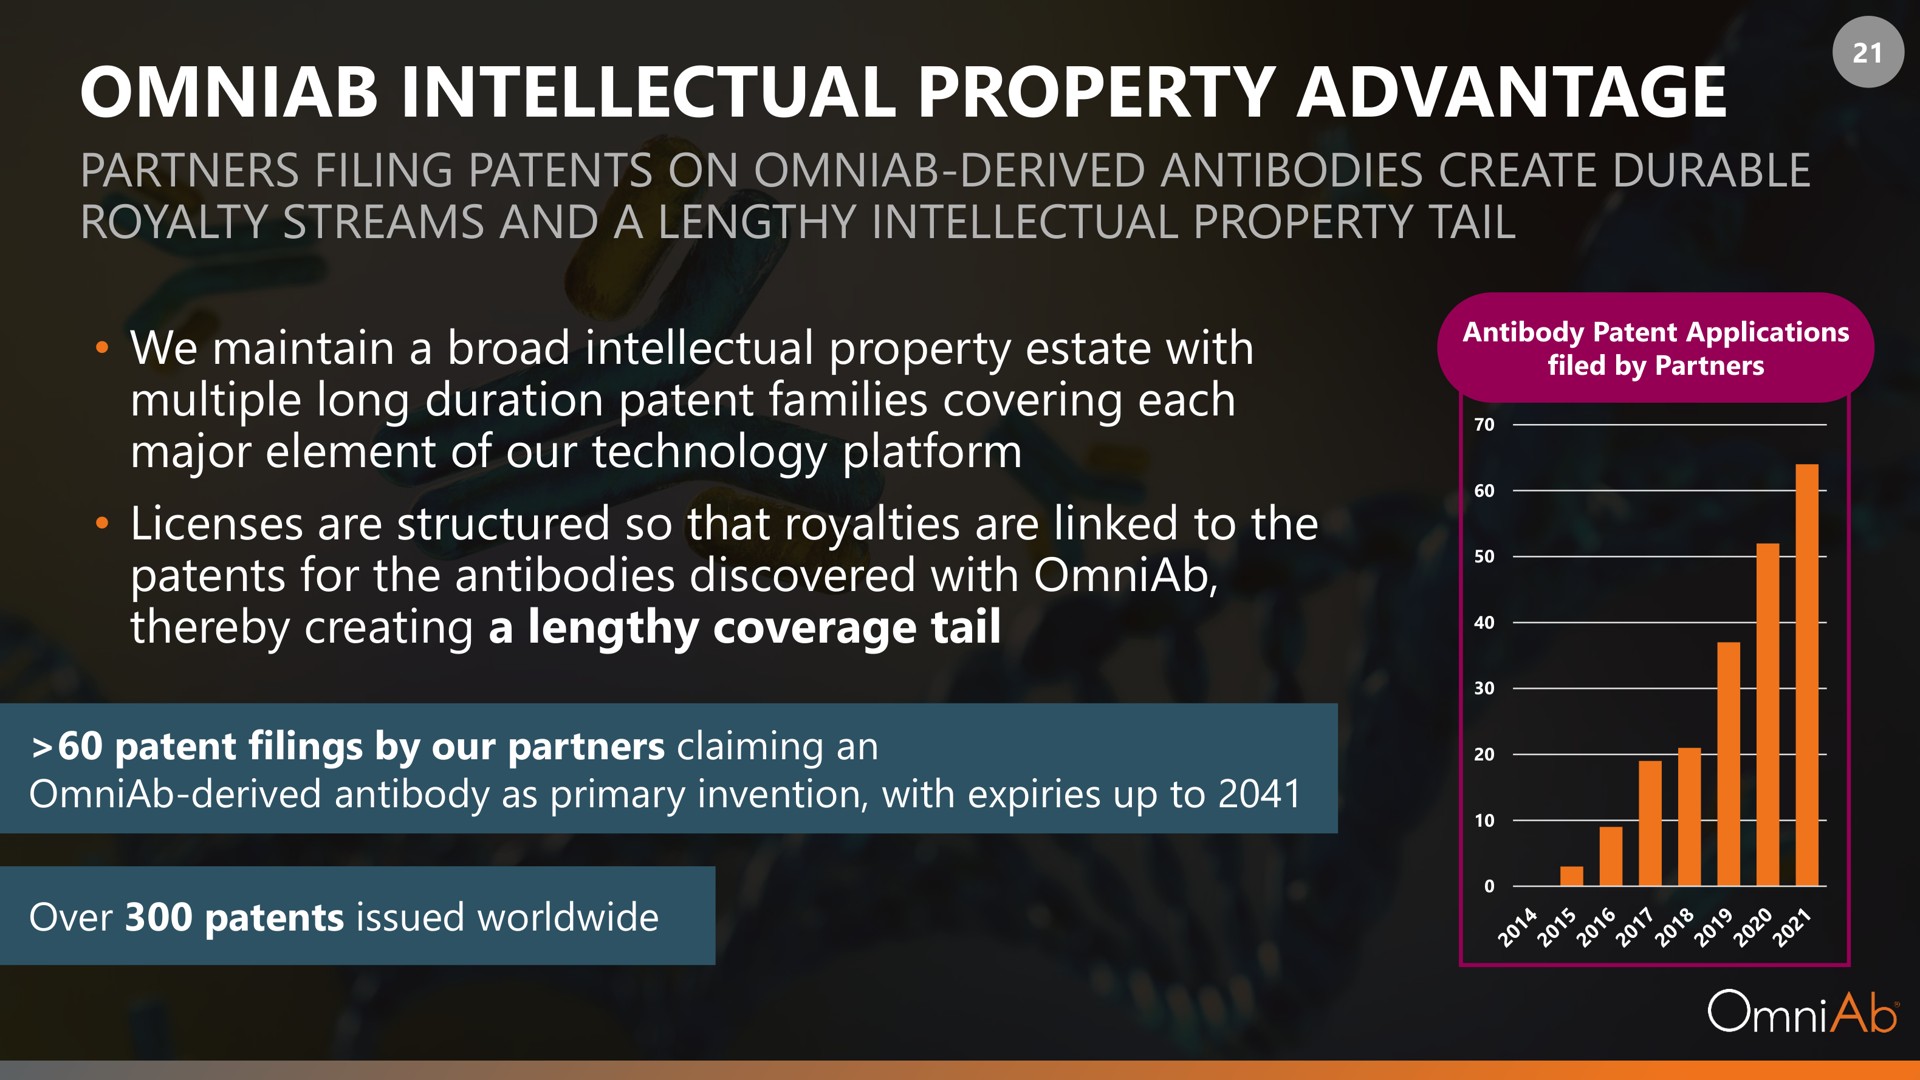 intellectual property advantage we maintain a broad estate with | OmniAb